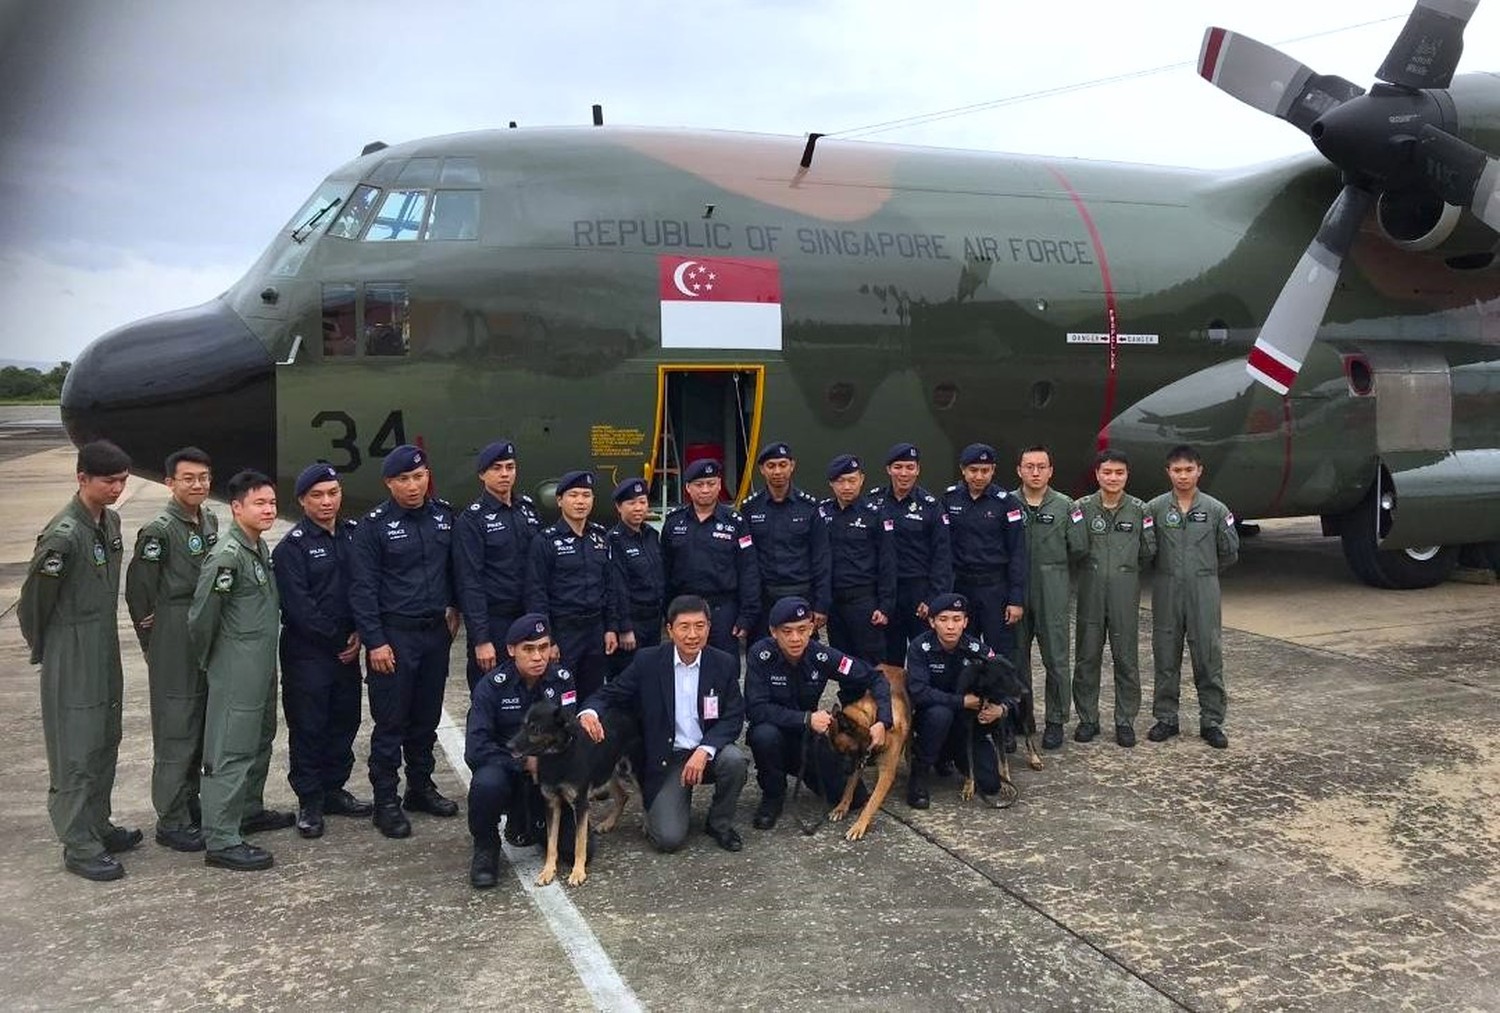 officers standing near the entrance of the C130, on the runway, with someone the ambassador in a blue suit kneeling infront of the group posing for the camera. 